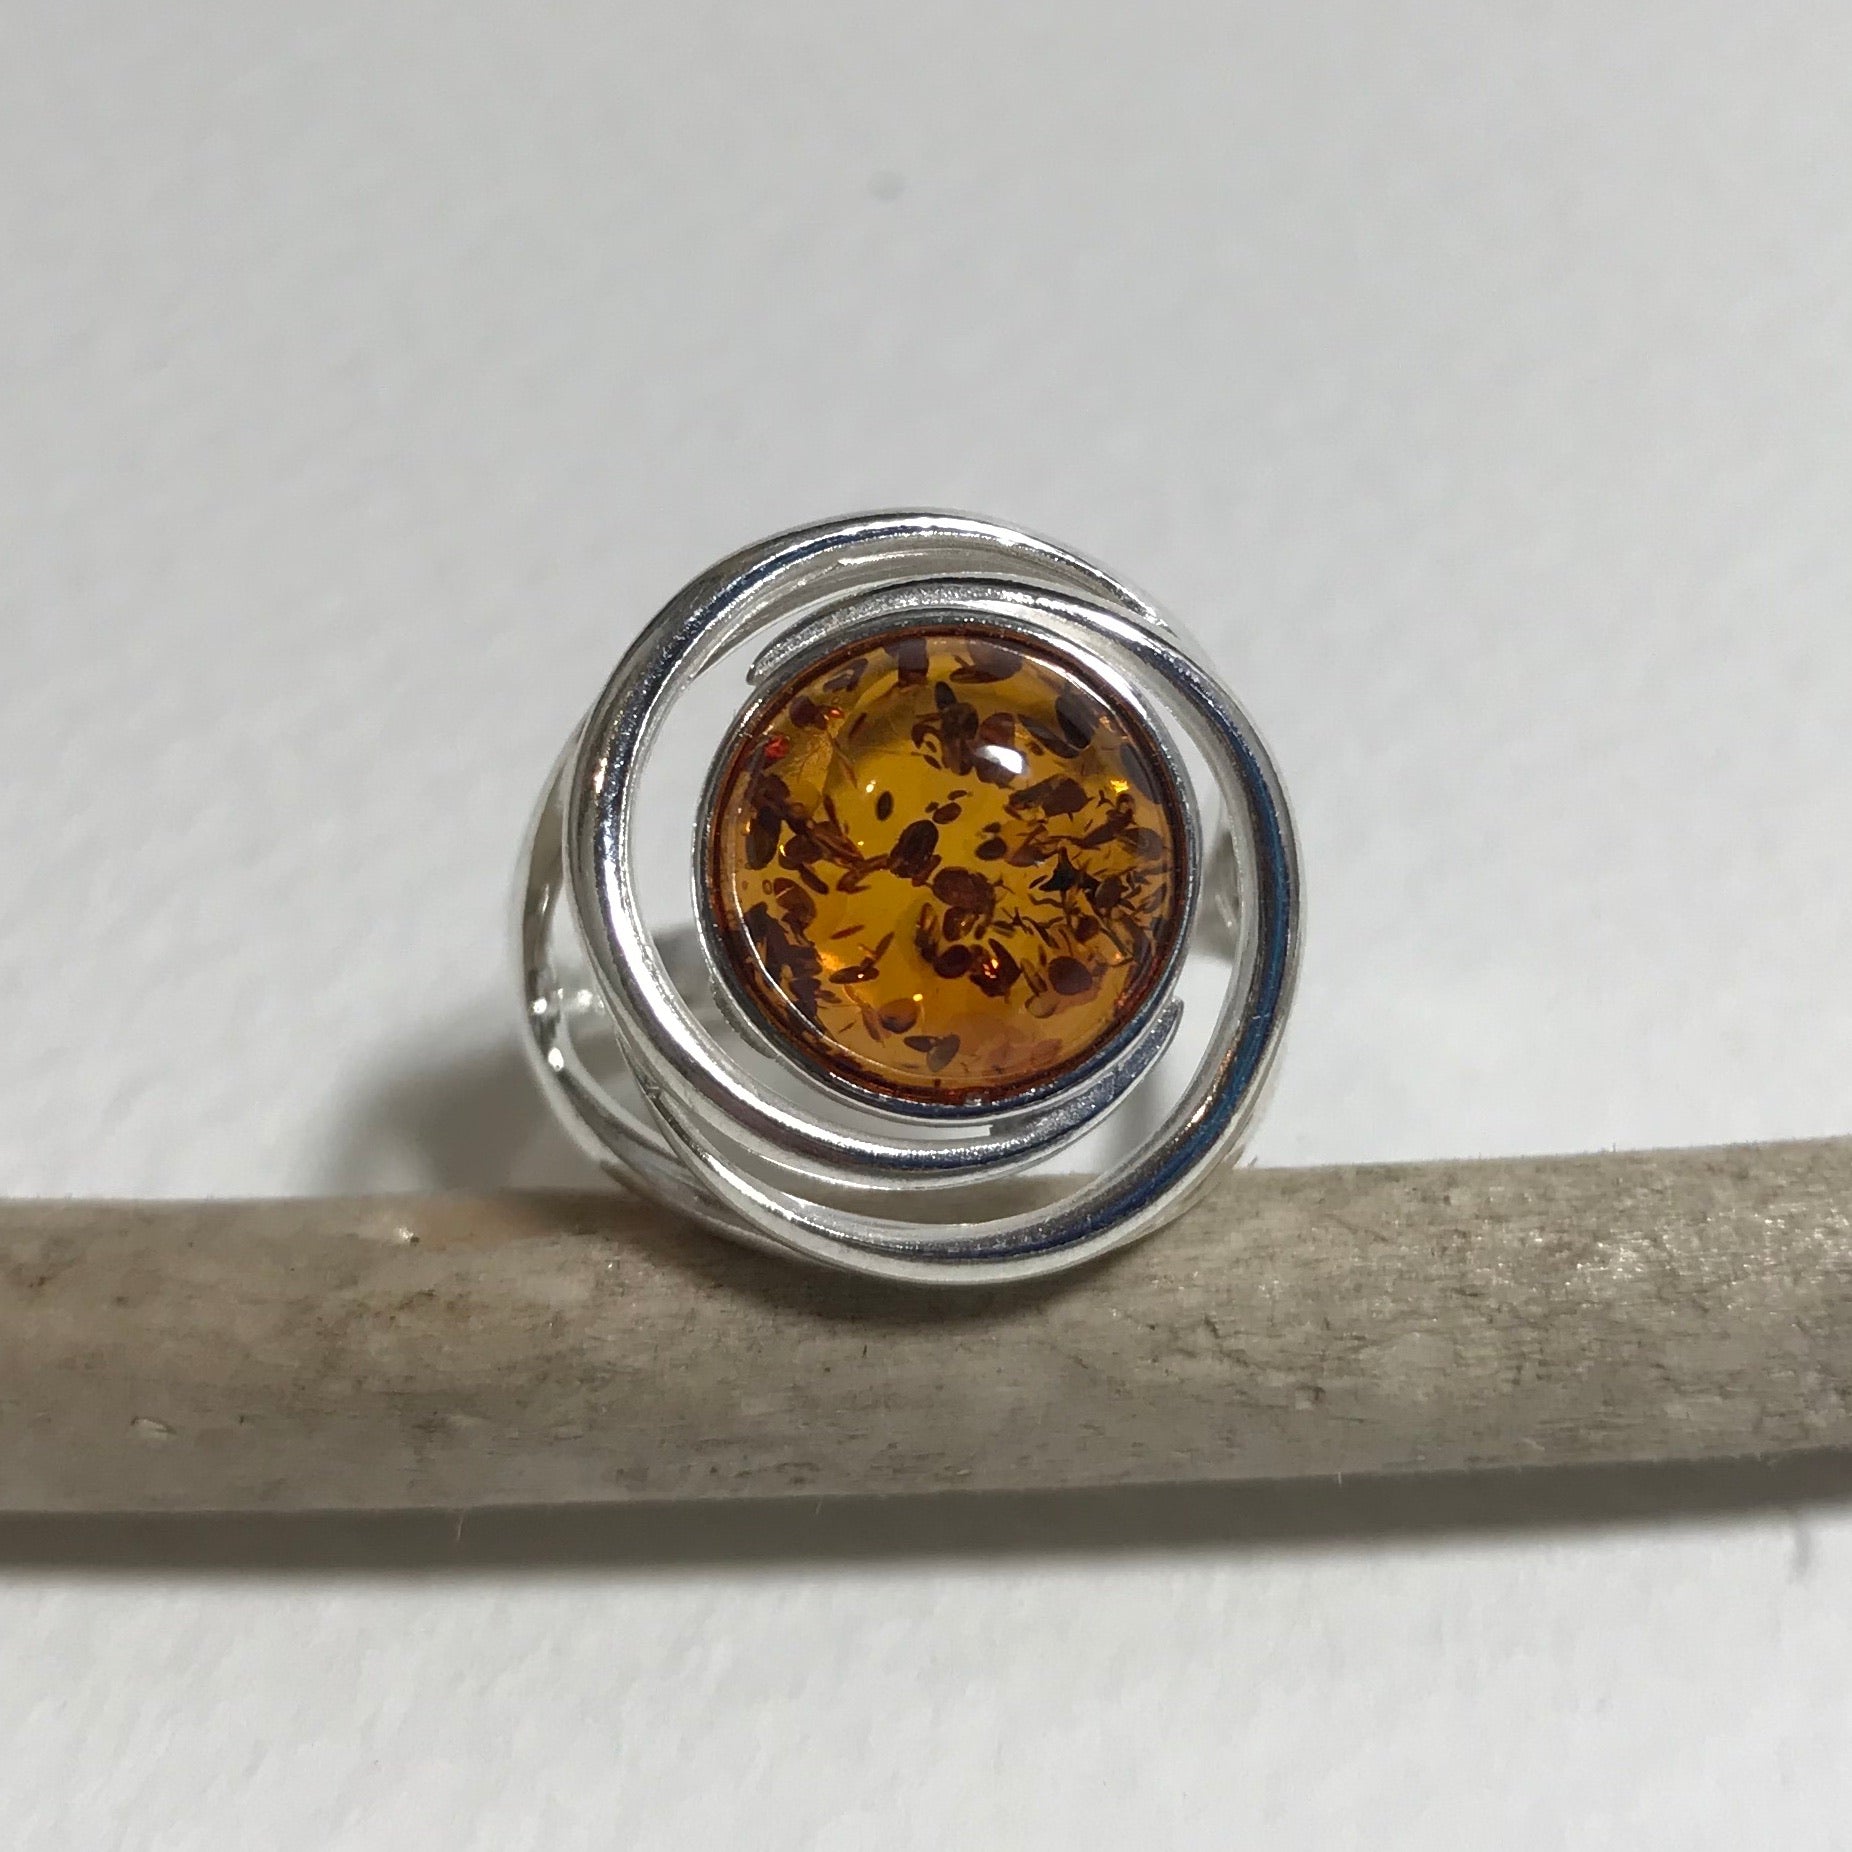 Wound Amber Ring - The Nancy Smillie Shop - Art, Jewellery & Designer Gifts Glasgow